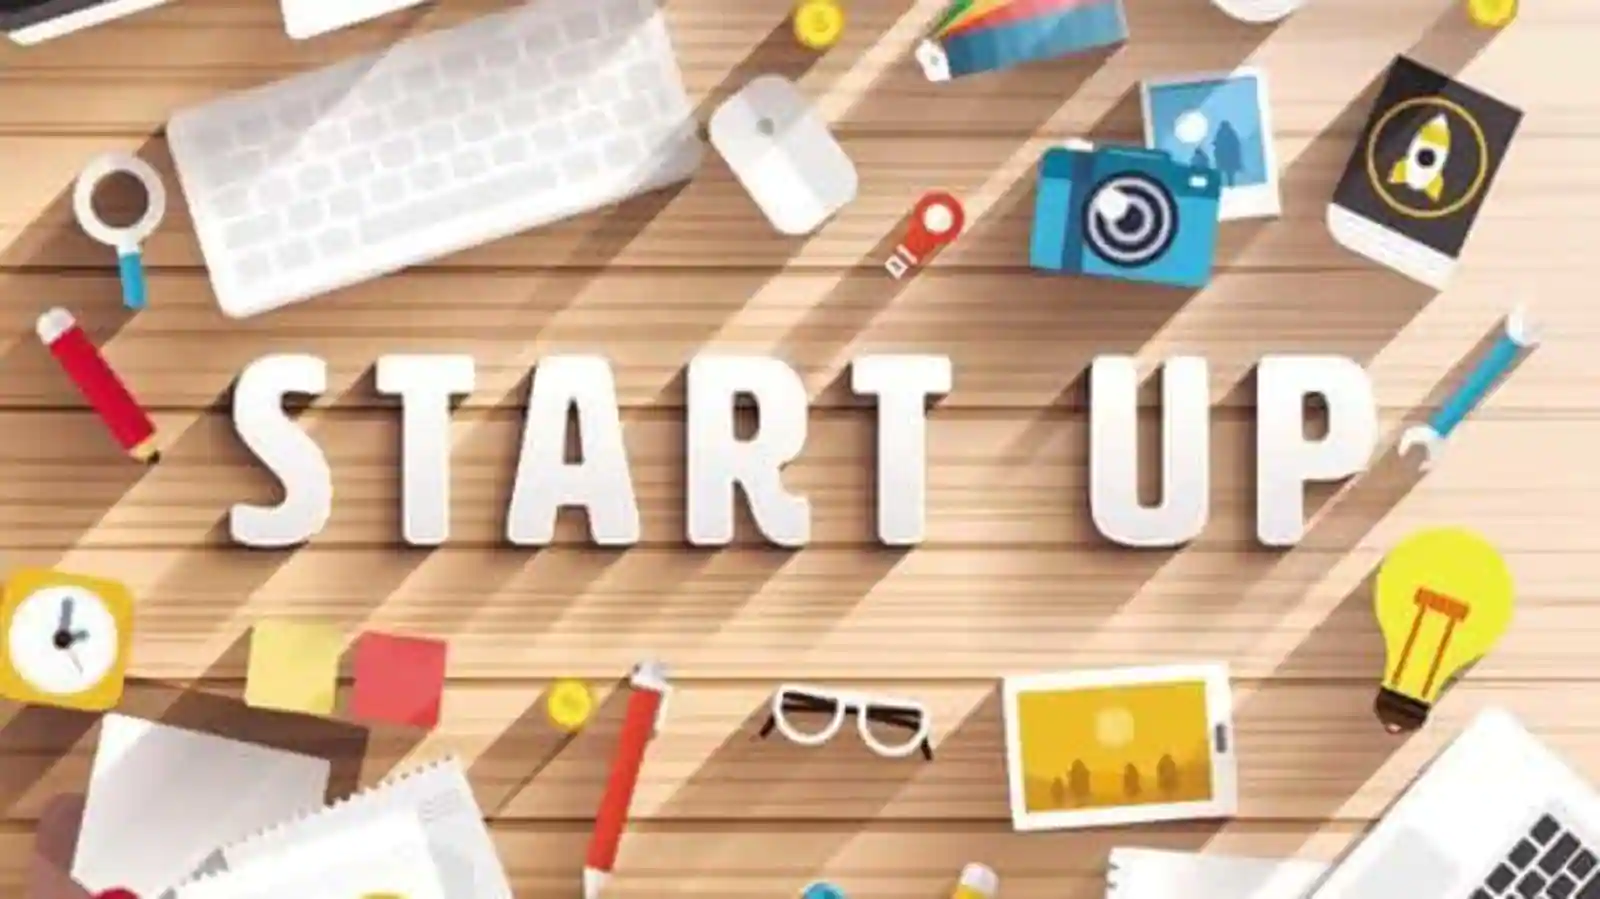 Startup Life Cycle; A startup is a company or organization that is in the initial stages of business, typically characterized by a small number of employees, limited operating history, and a focus on developing a unique product or service.